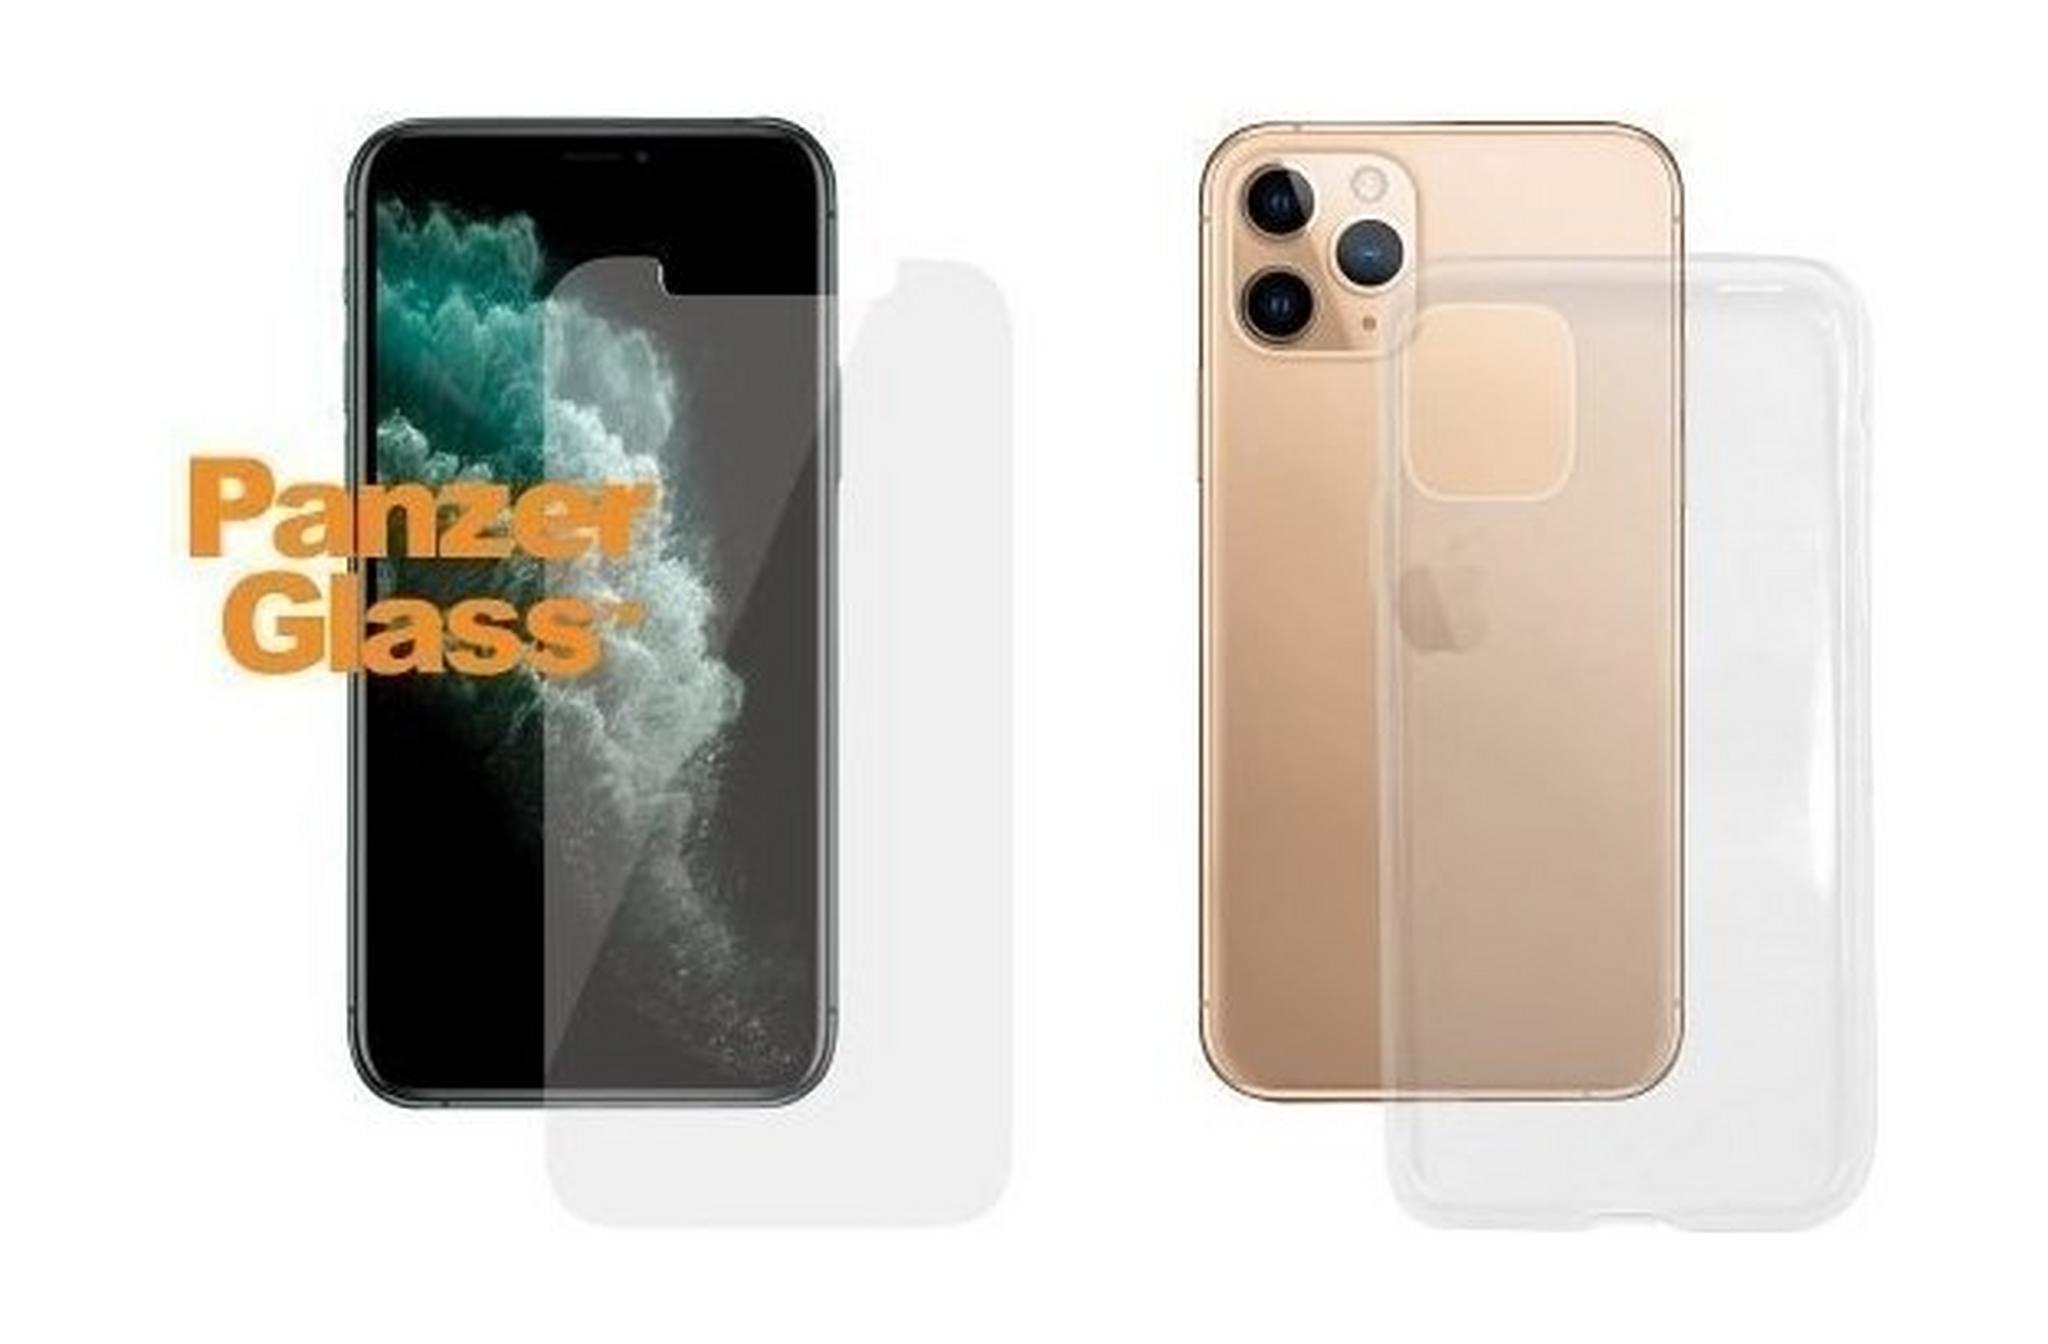 PanzerGlass Dual-360 Screen Protector & Soft Case for iPhone 11 Pro